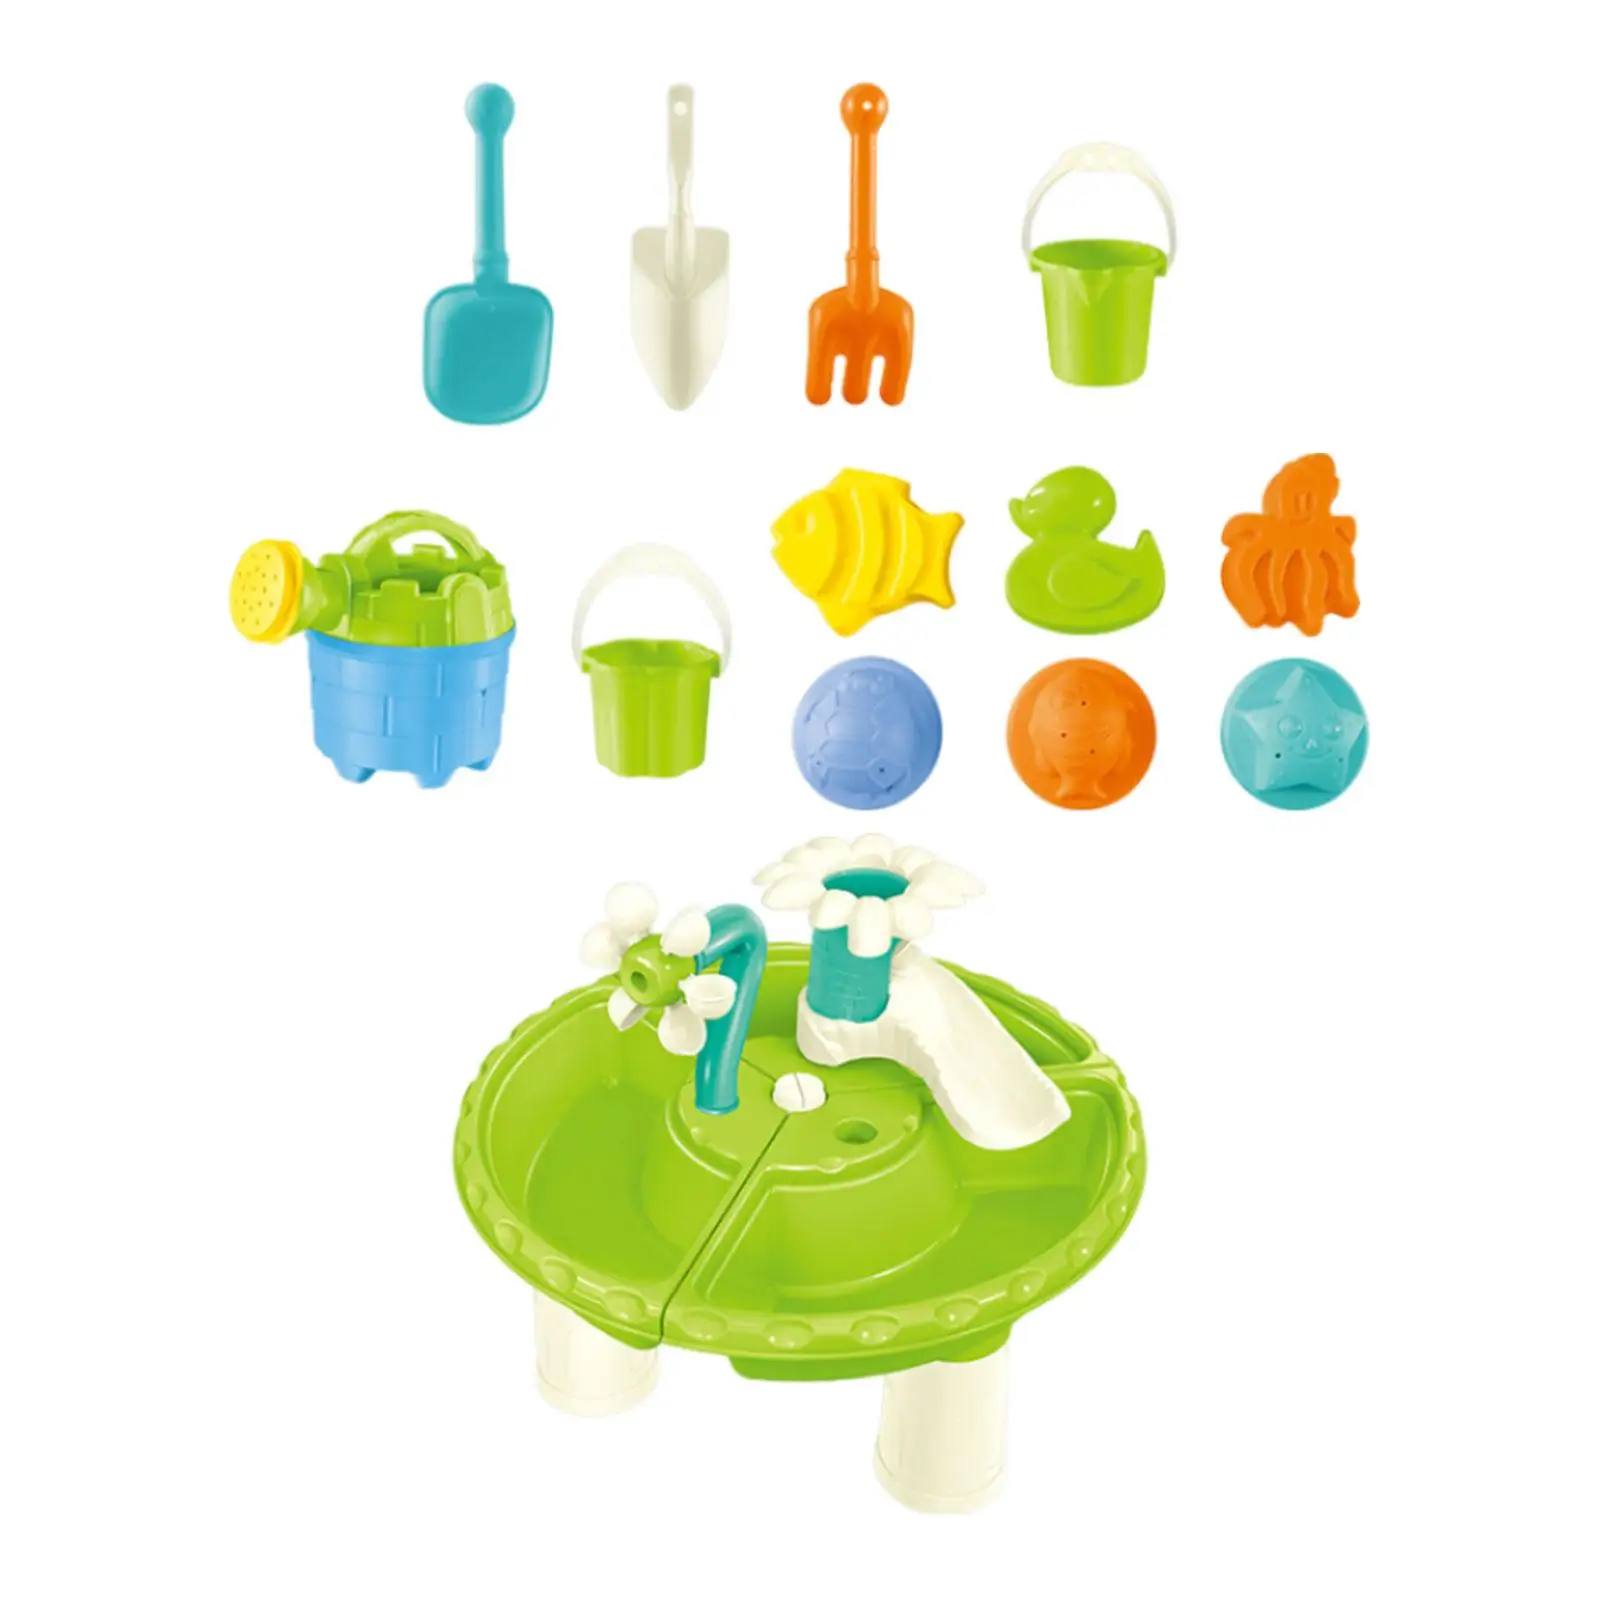 13Pcs kid water Table Outdoor Toys Sand Dredging tool Water Table for Backyard Outside Beach Outdoor Age 1-3 3-5